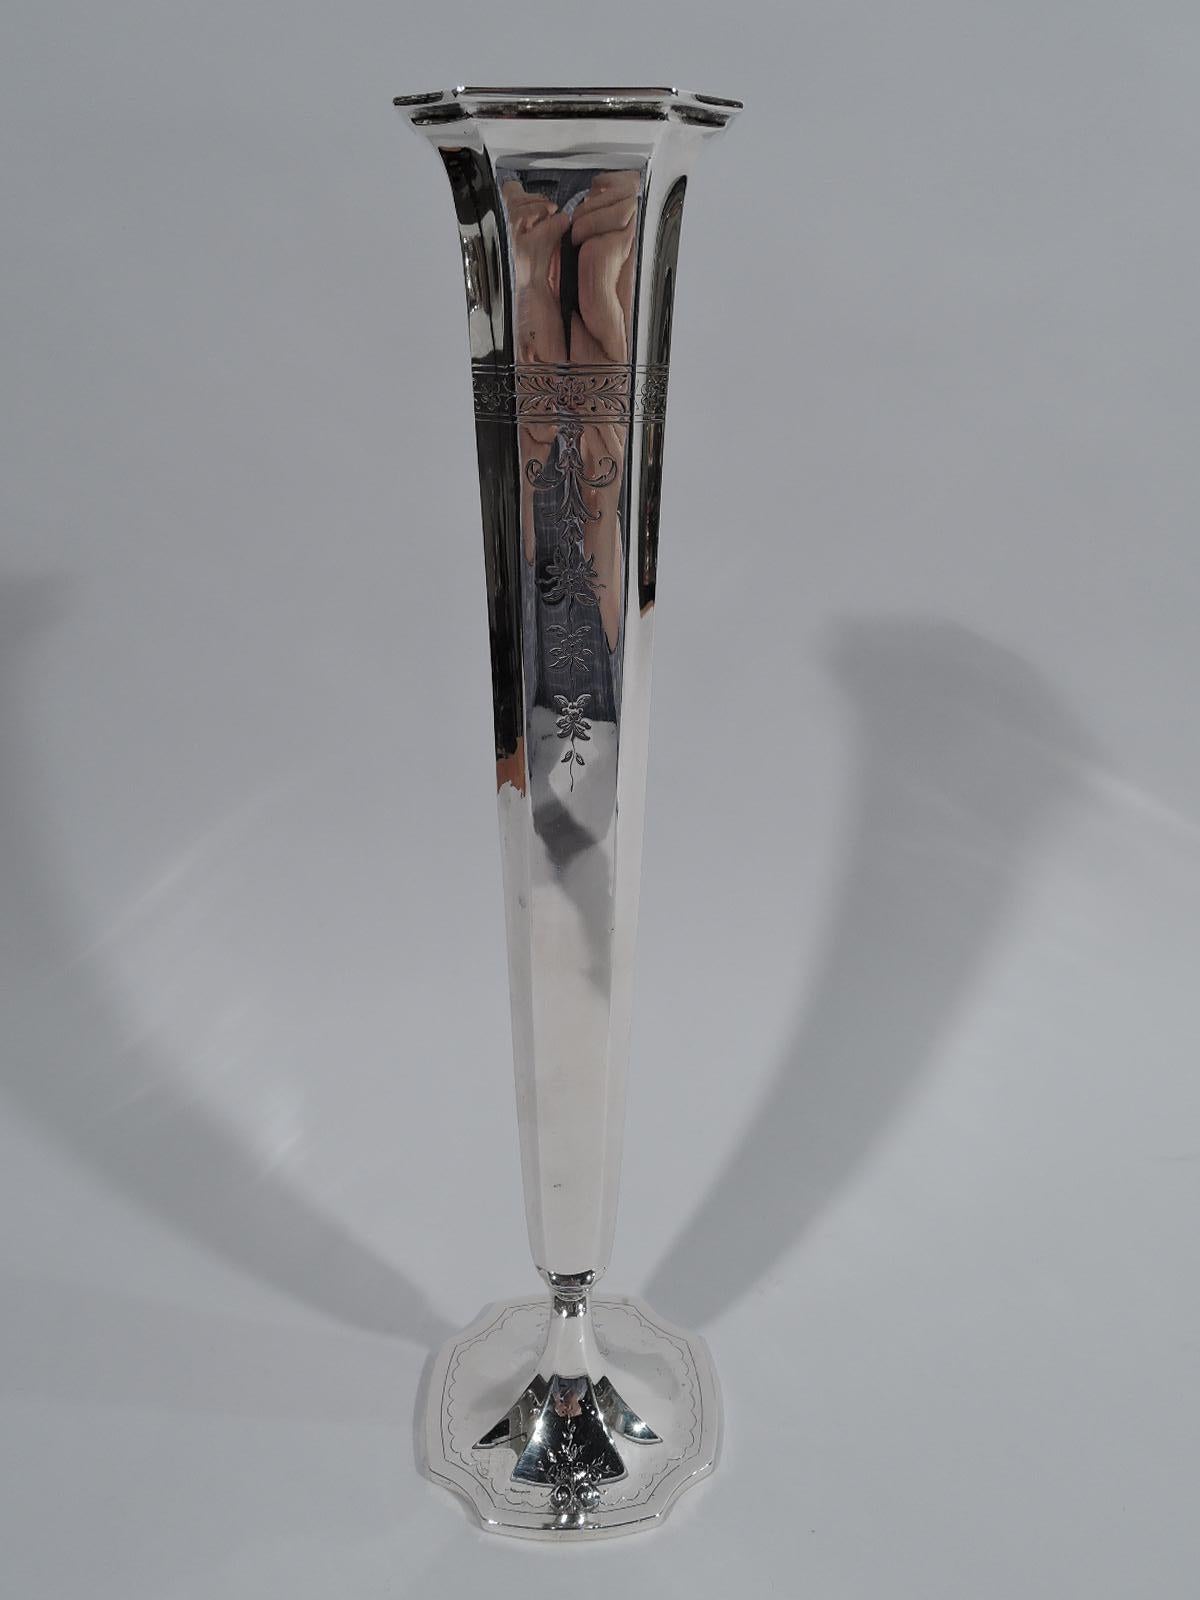 Tall Edwardian sterling silver vase. Made by Reed & Barton in Taunton, Mass., circa 1915. Narrow and quadrilateral with concave corners. Engraved floral border with pendant flowers. Foot raised, faceted, and concave with engraved scalloped border